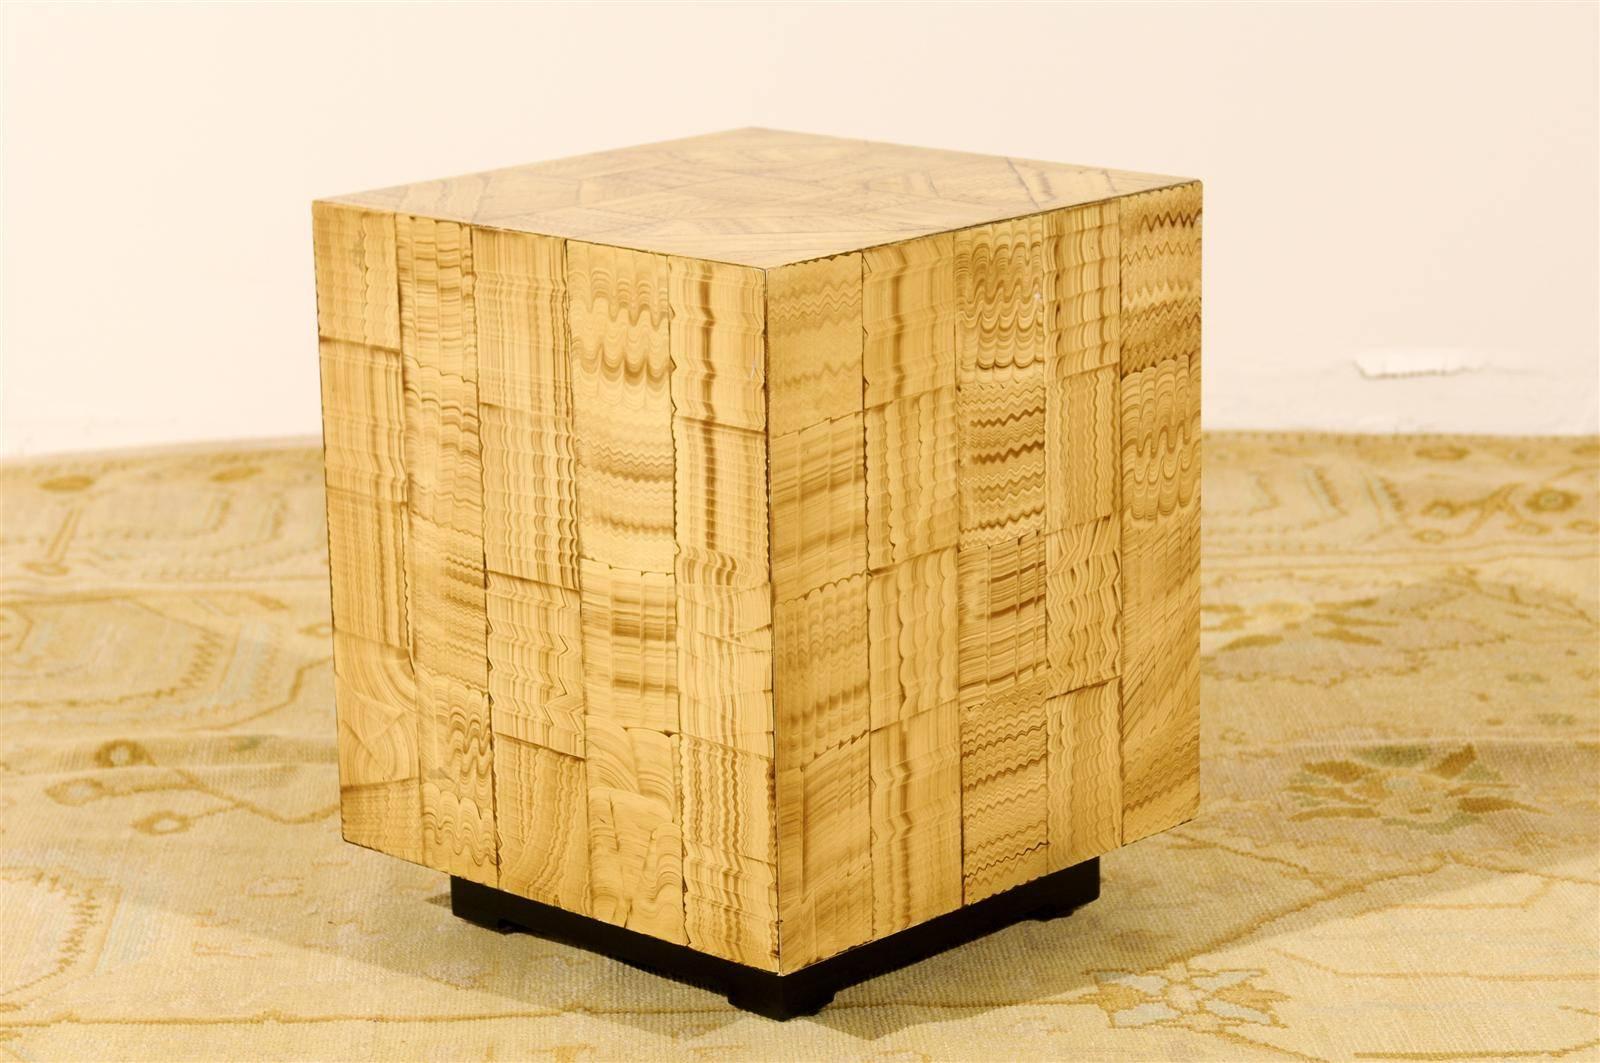 These magnificent cube tables are shipped as professionally photographed and described in the listing: Excellent Restored Condition and ready to install.

A fabulous pair of hand lacquered cubes on a black lacquer plinth. Heavy solid hardwood